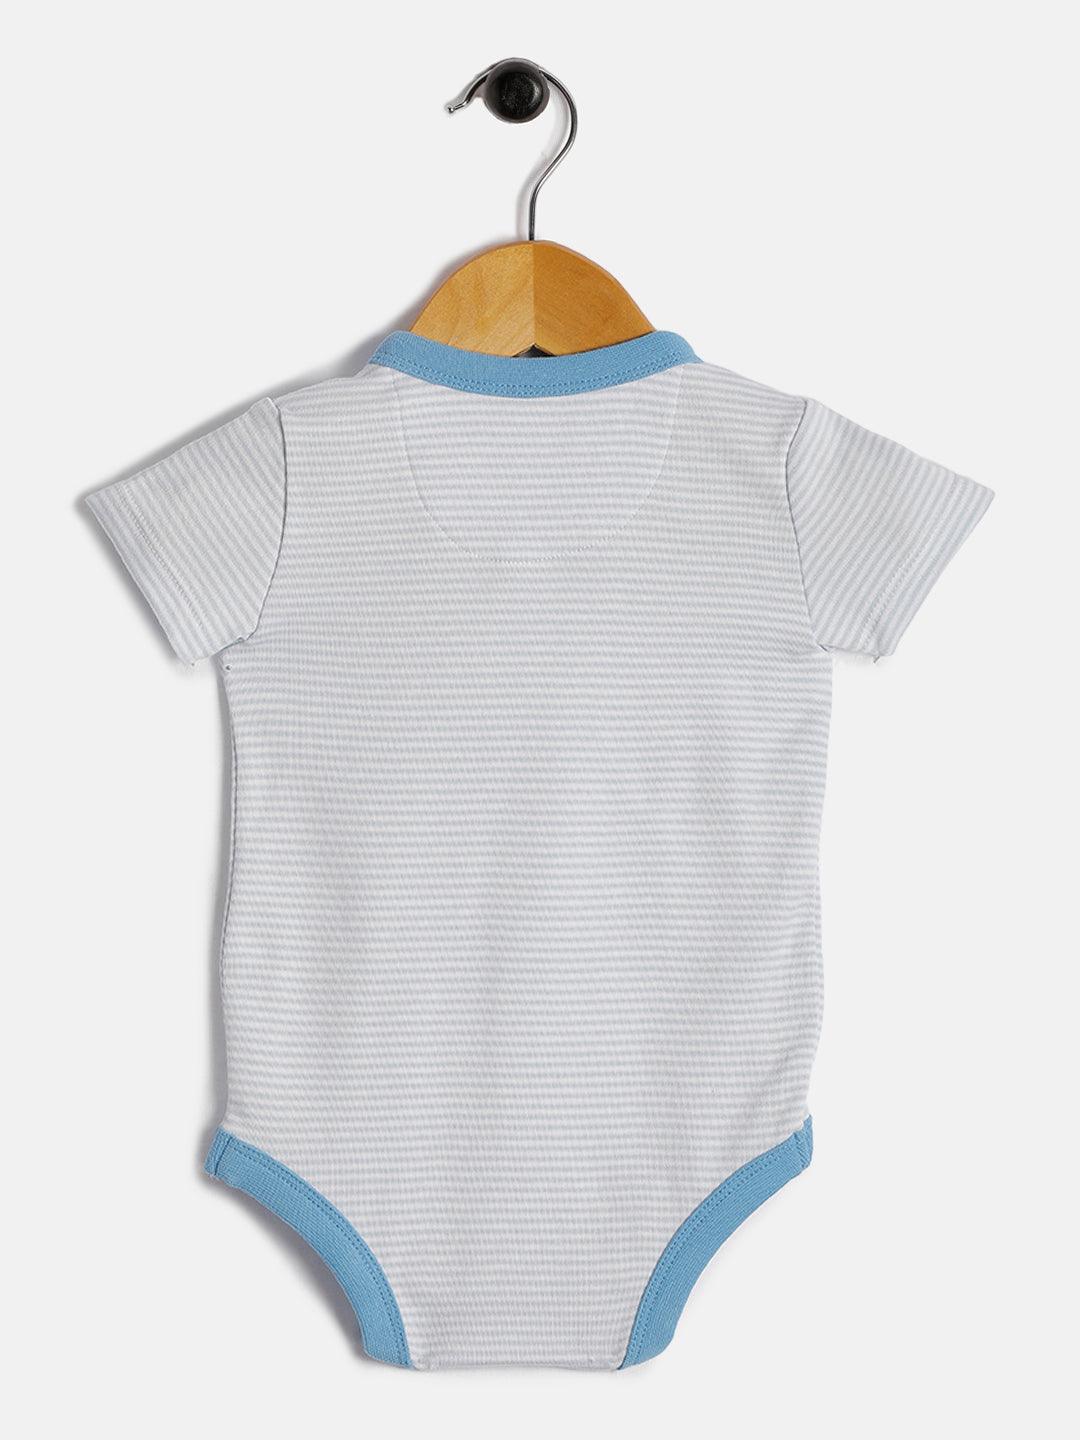 New Born Baby Boy Striped Body Suit - Juscubs